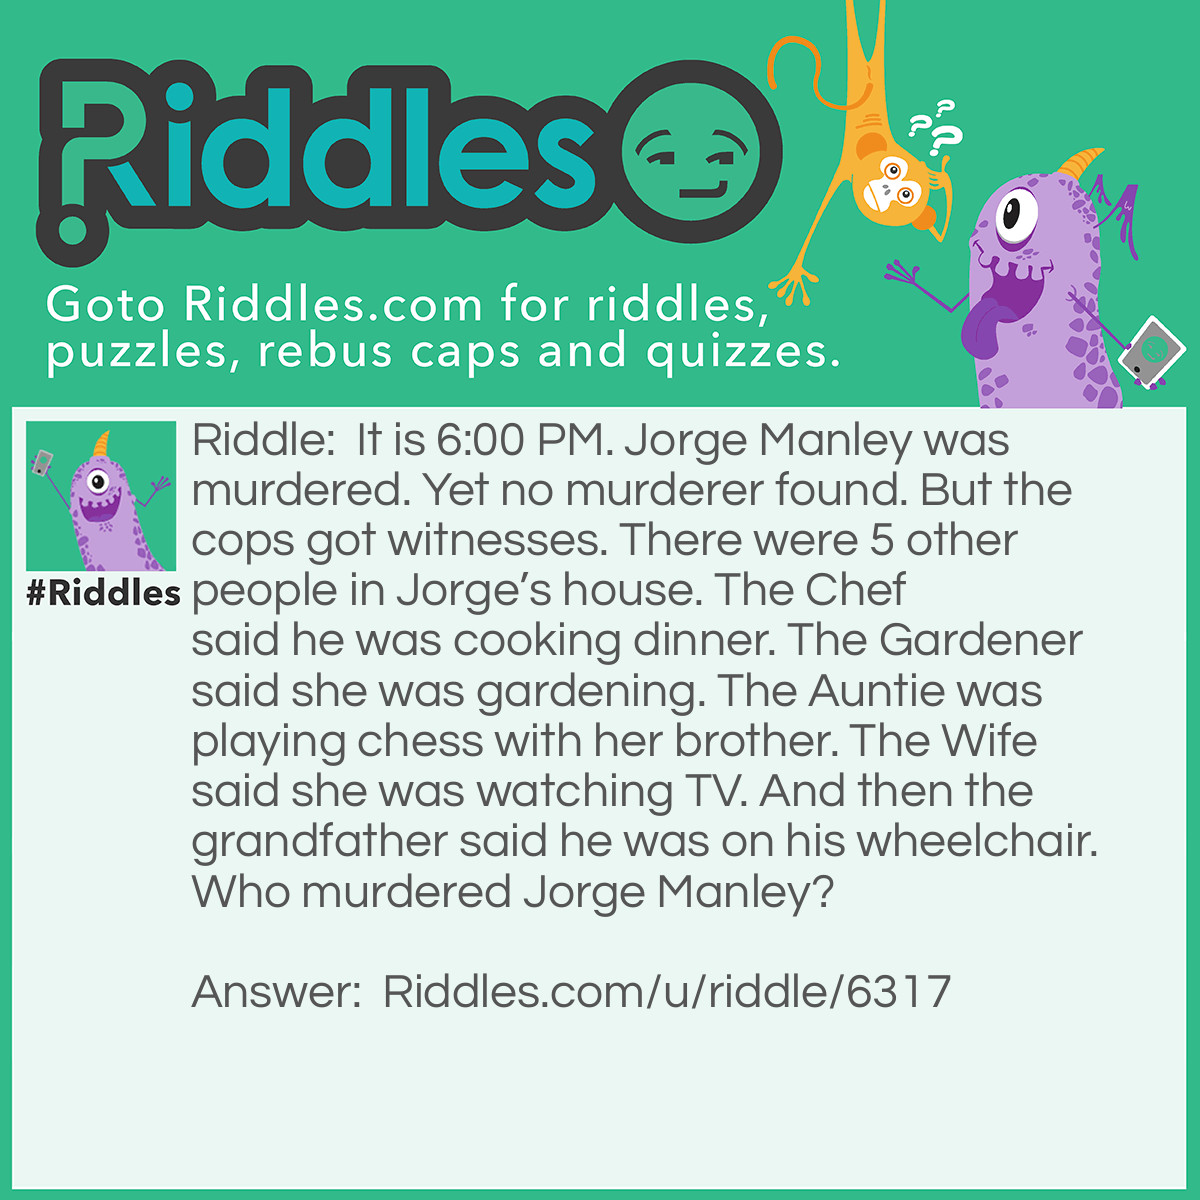 Riddle: It is 6:00 PM. Jorge Manley was murdered. Yet no murderer found. But the cops got witnesses. There were 5 other people in Jorge's house. The Chef said he was cooking dinner. The Gardener said she was gardening. The Auntie was playing chess with her brother. The Wife said she was watching TV. And then the grandfather said he was on his wheelchair. Who murdered Jorge Manley? Answer: The Aunt. There were 5 people in the house (Aside from Jorge). The Gardener, Chef, Auntie, Grandfather, and wife. Yet the Aunt said she was playing chess with his brother when there were only 5 people in the house?